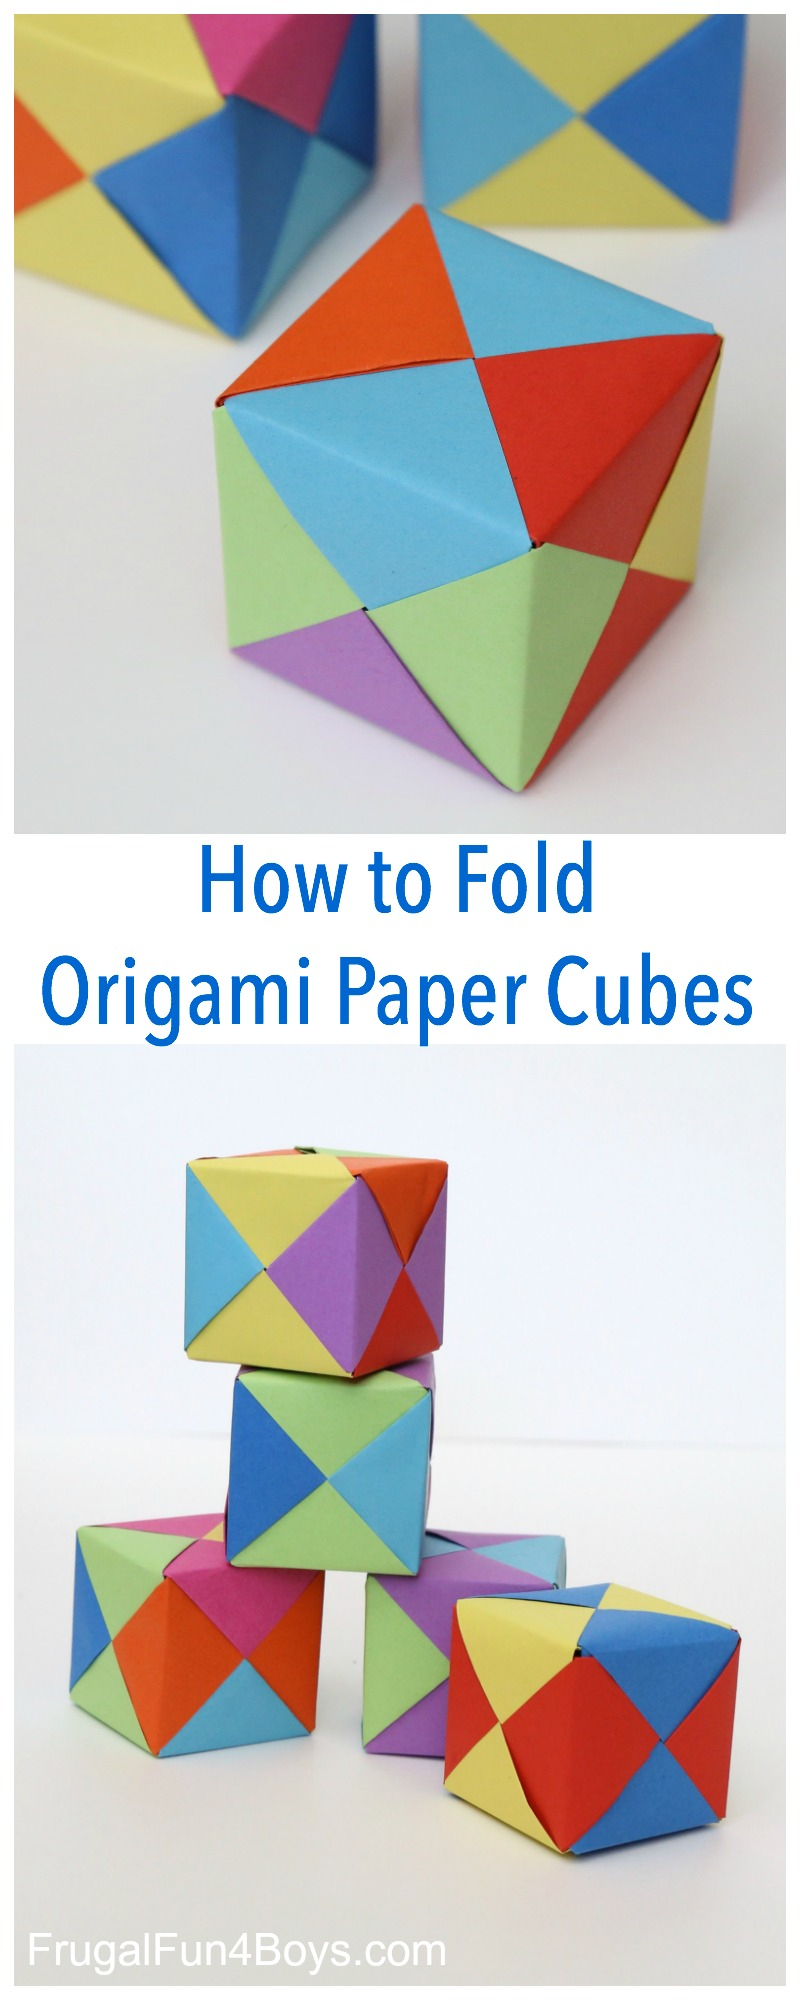 5 Note Origami How To Fold Origami Paper Cubes Frugal Fun For Boys And Girls